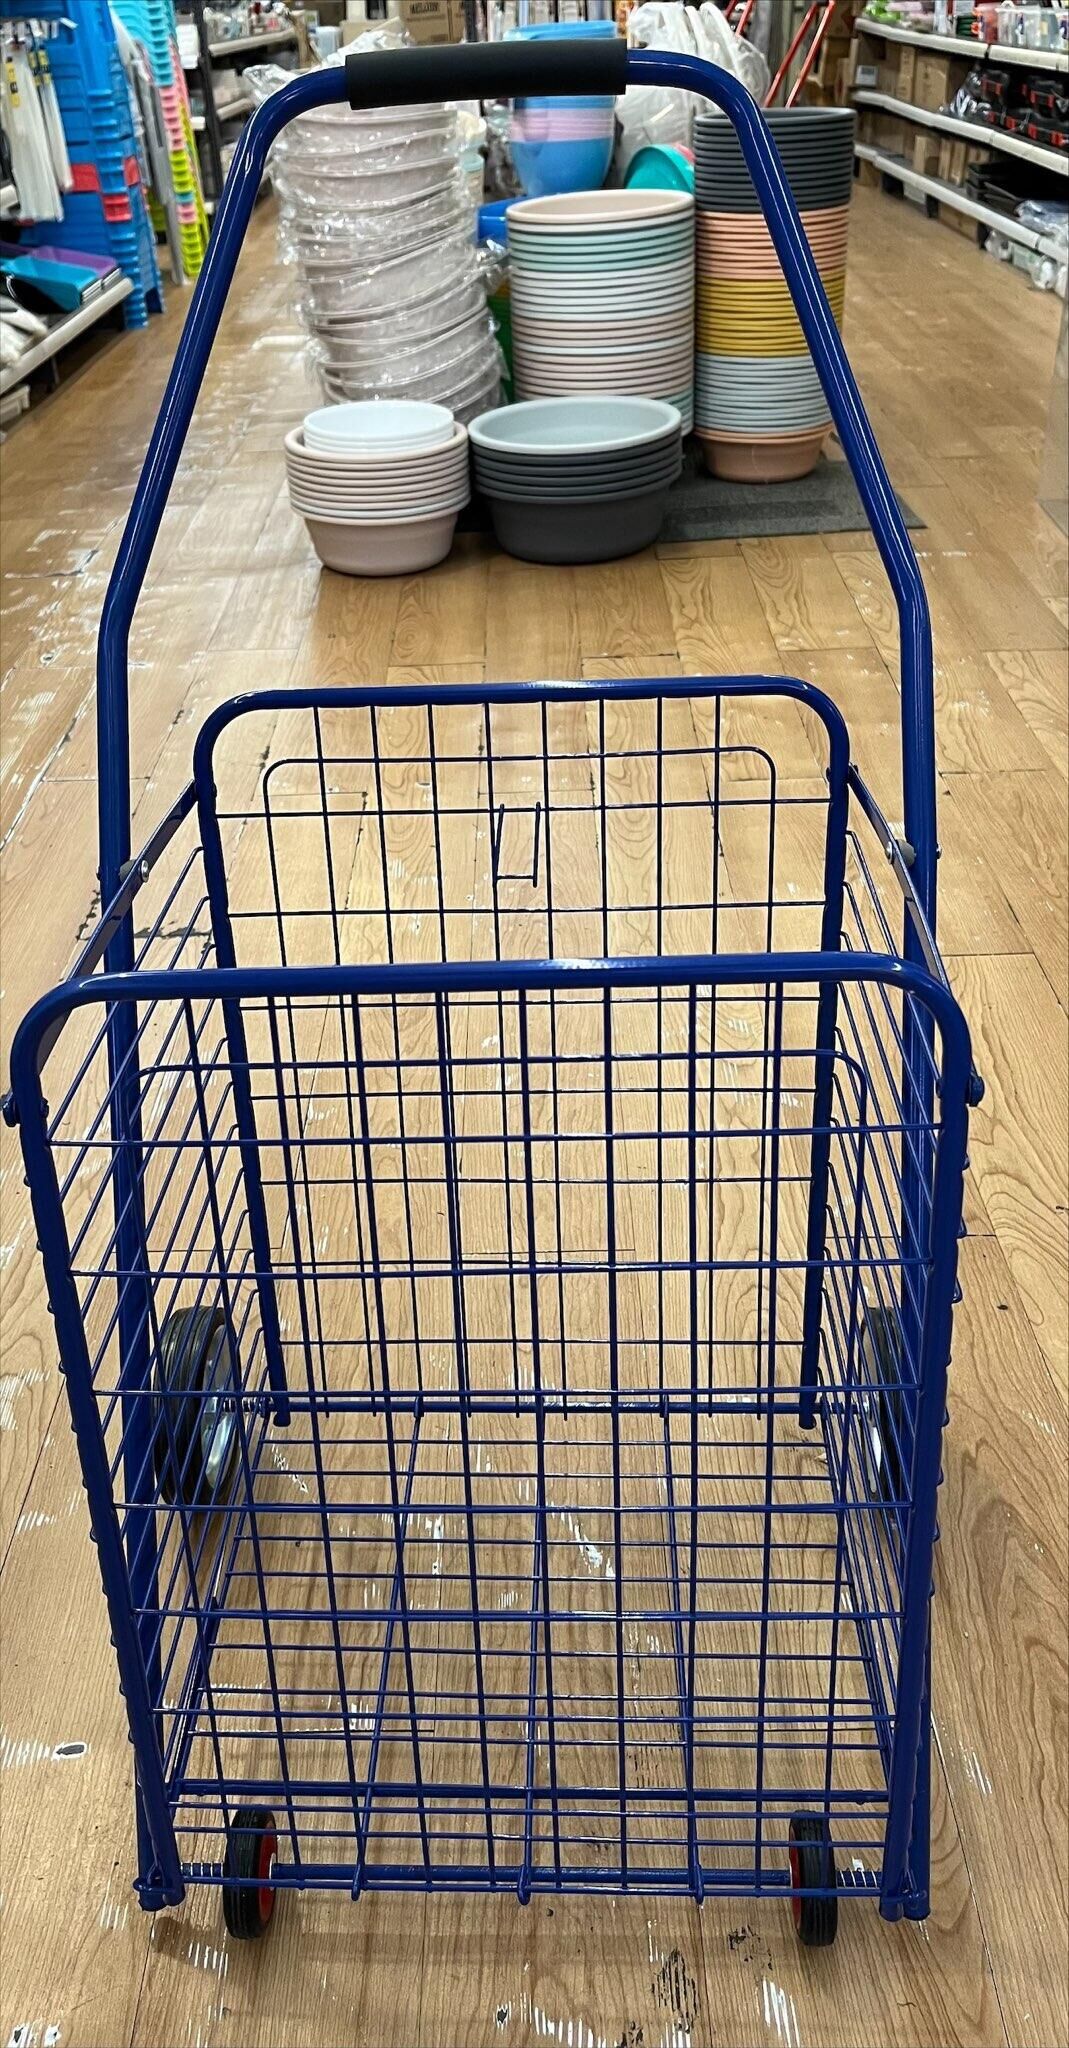 406 Square Shopping Cart-Red Blue  Metal